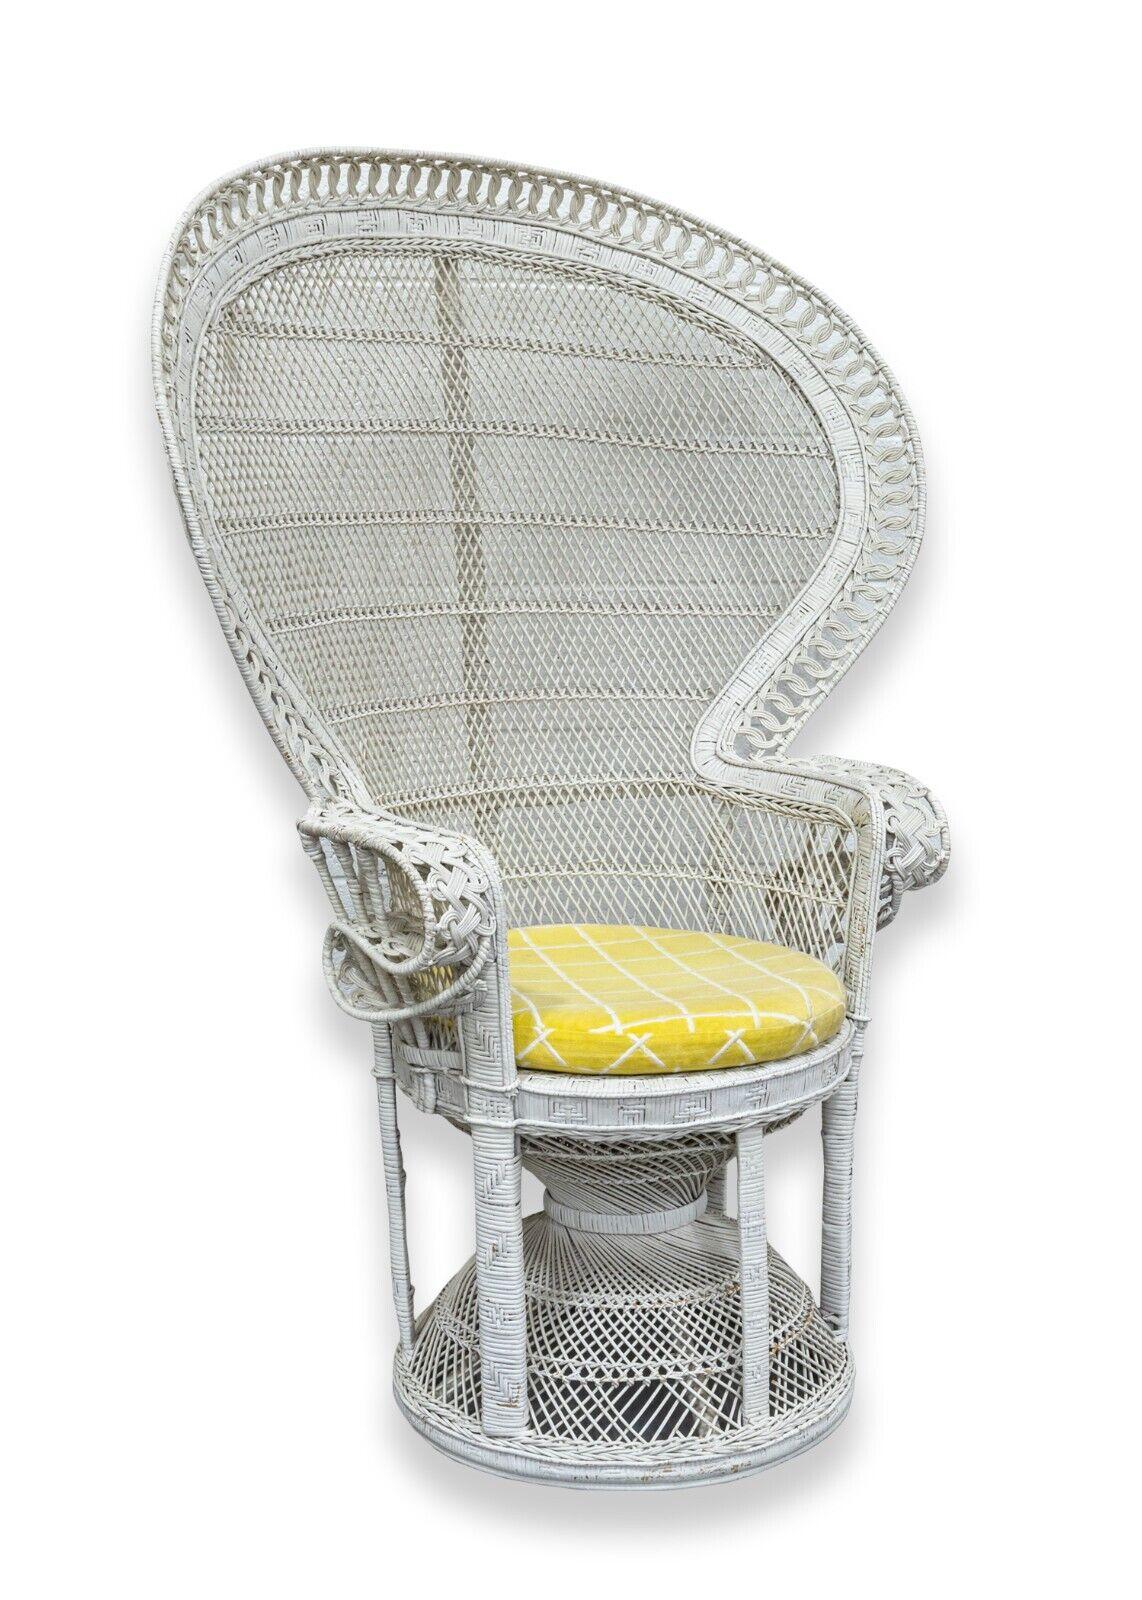 A vintage Emmanuel white wicker peacock accent chair with yellow seat cushion. A lovely wicker chair with a classic, vintage design. This accent chair features a woven wicker construction, a painted white finish, and a yellow with white stripe